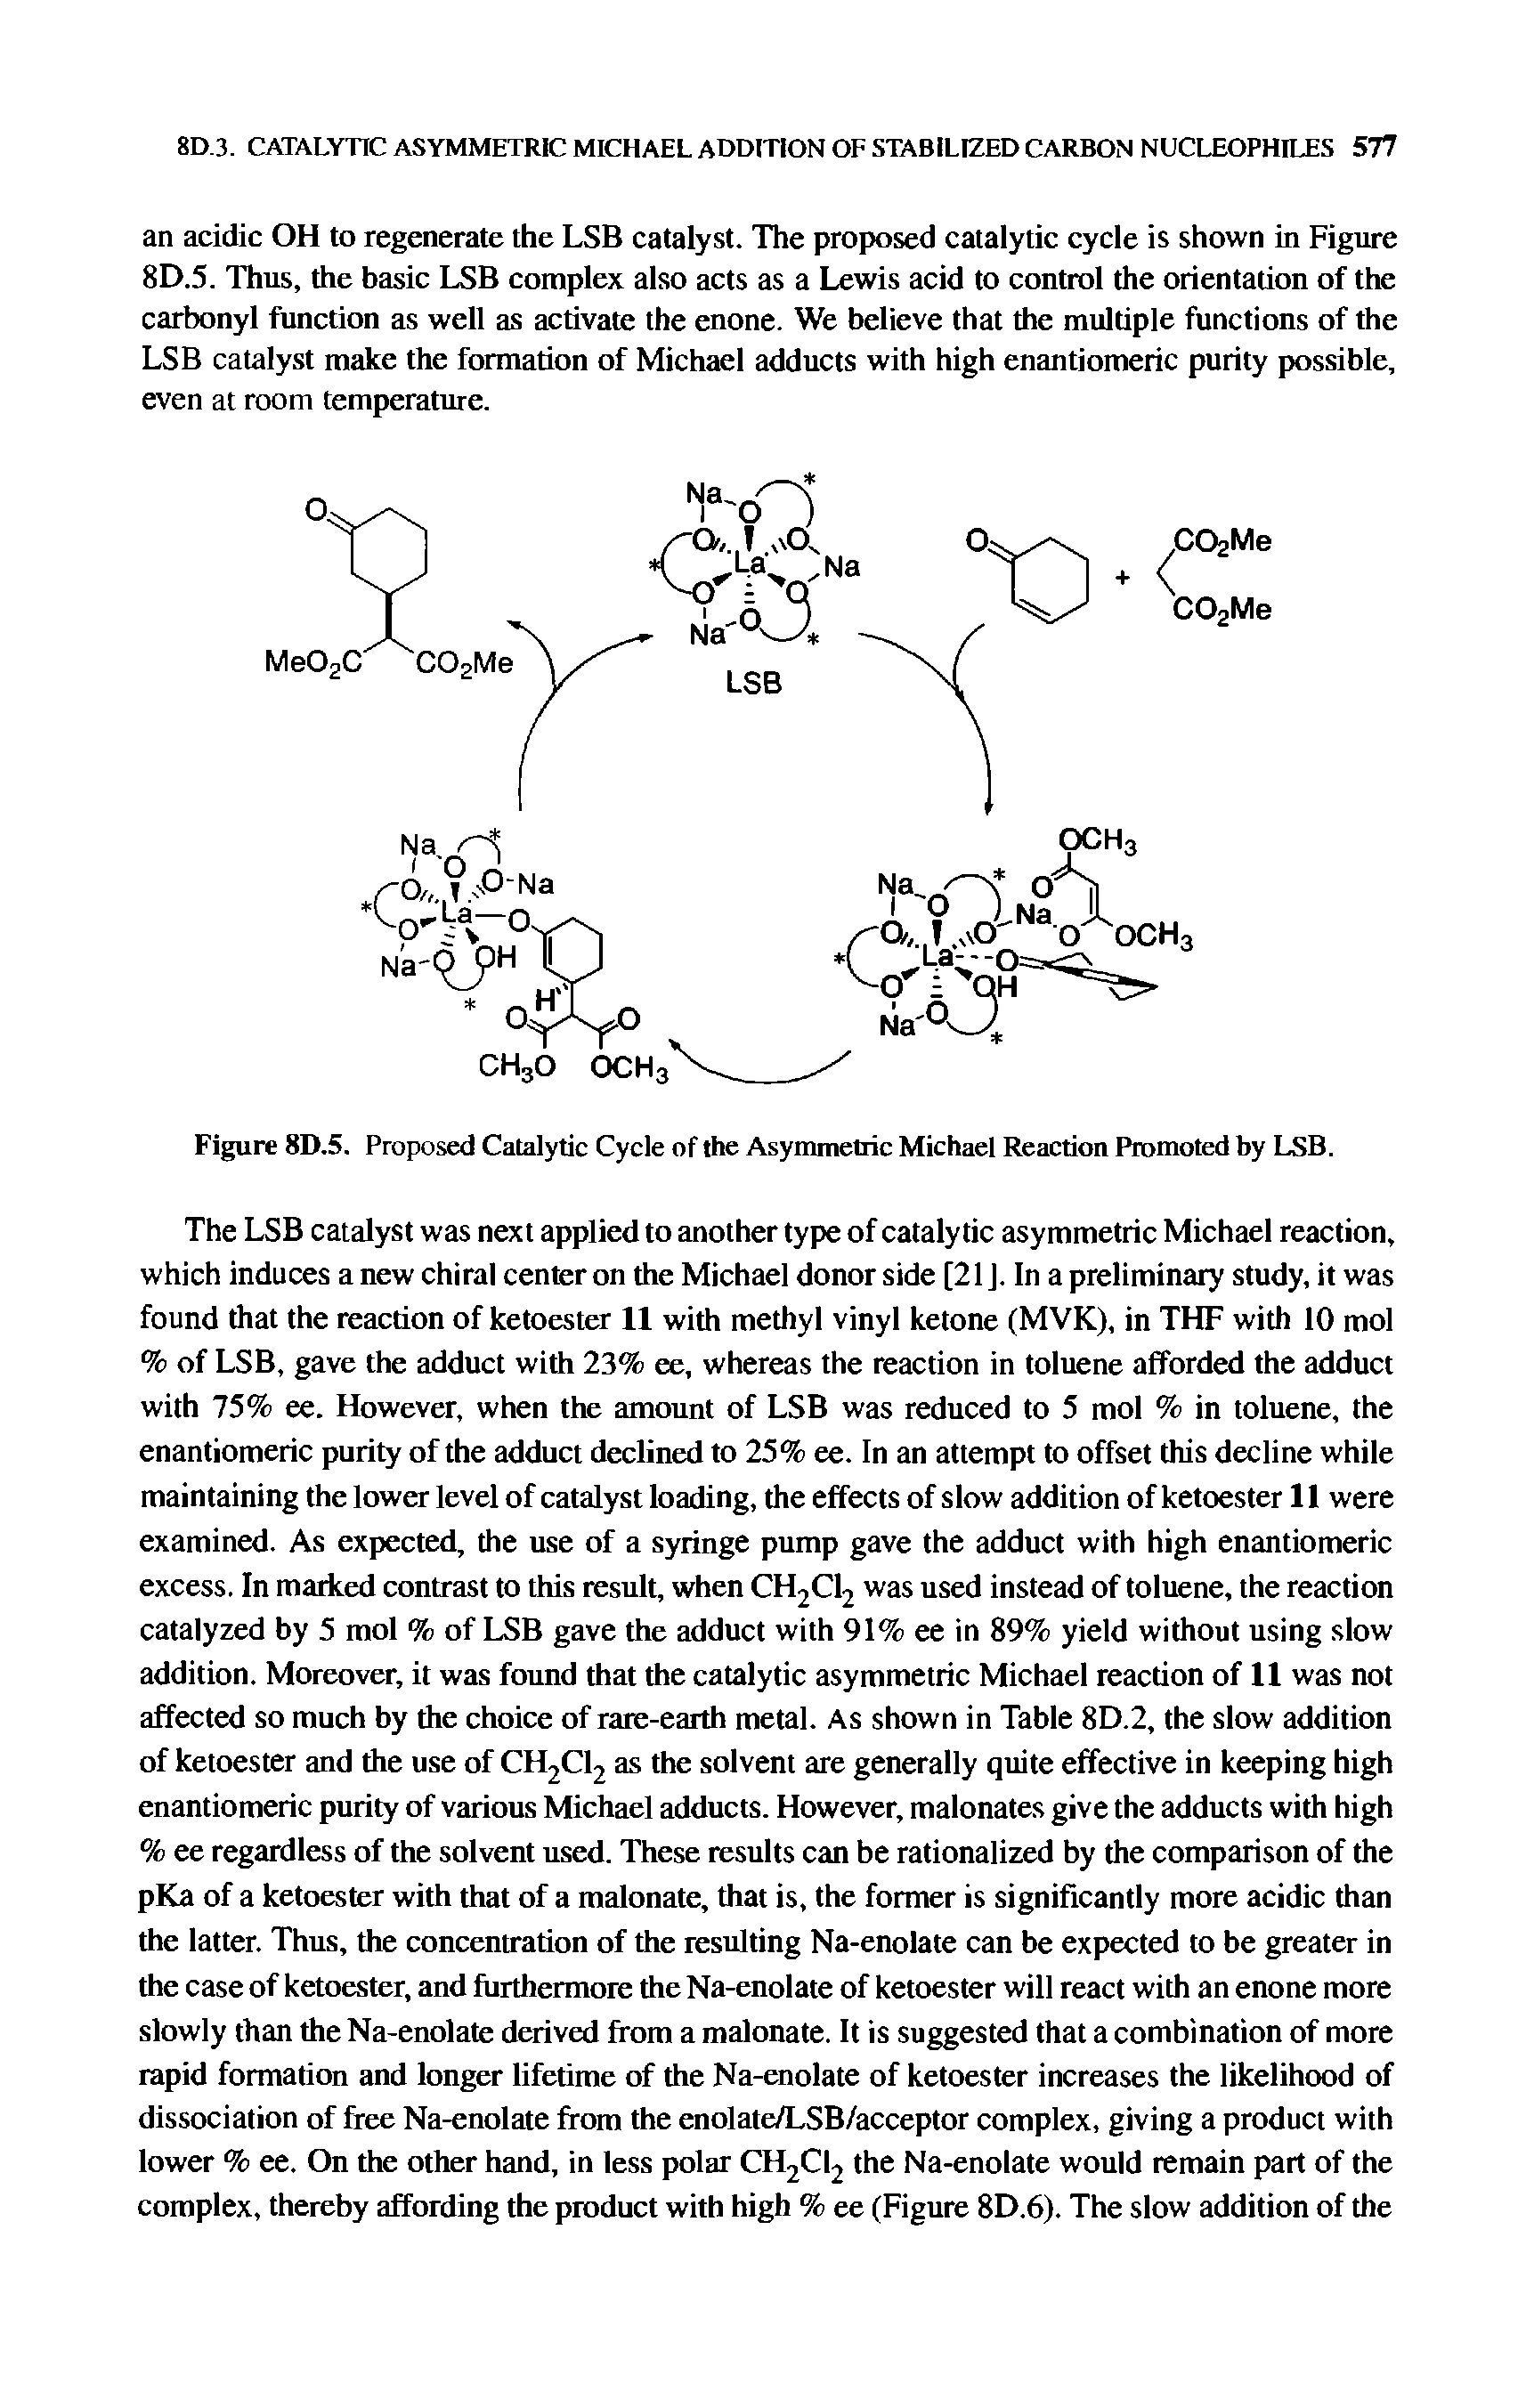 Figure 8D.5. Proposed Catalytic Cycle of the Asymmetric Michael Reaction Promoted by LSB.